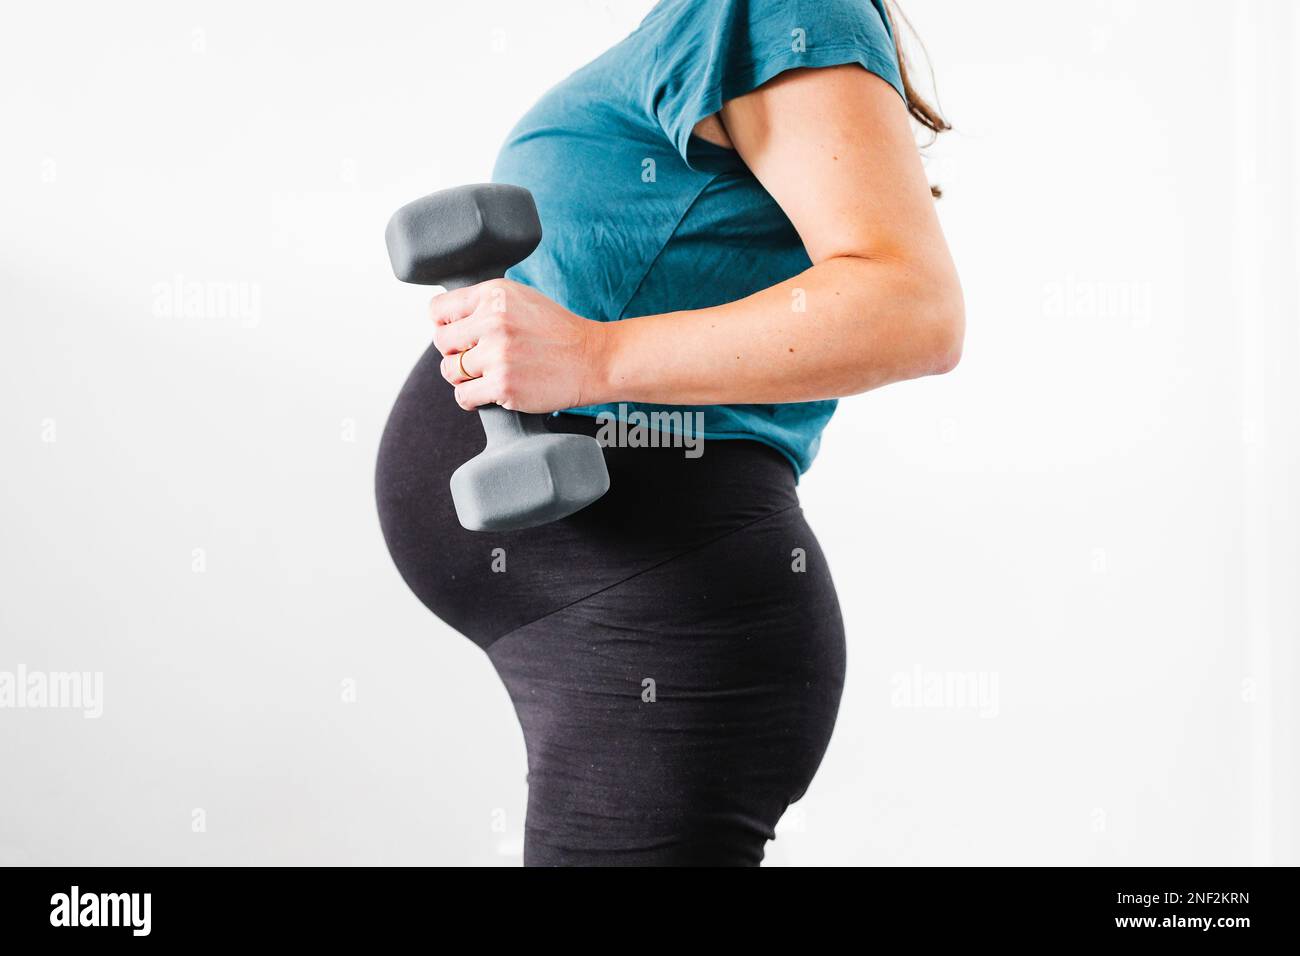 pregnant woman exercising with dumbbell in her hand and showing her bump in the latest stage of pregnancy, mid-section showing the belly and body shap Stock Photo